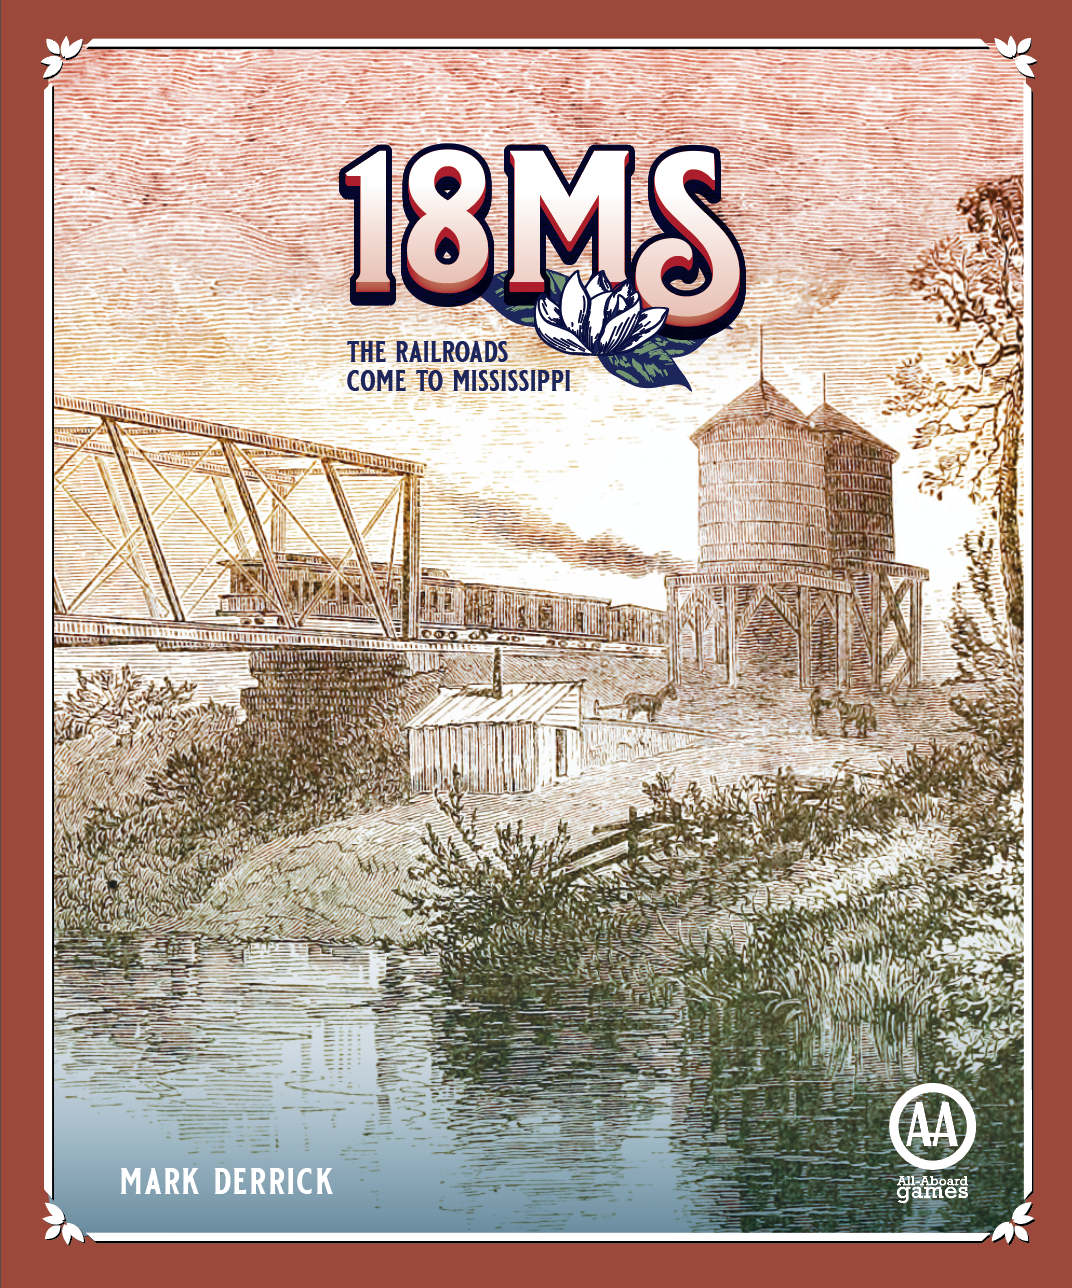 US/CA - 18MS: The Railroads Come to Mississippi